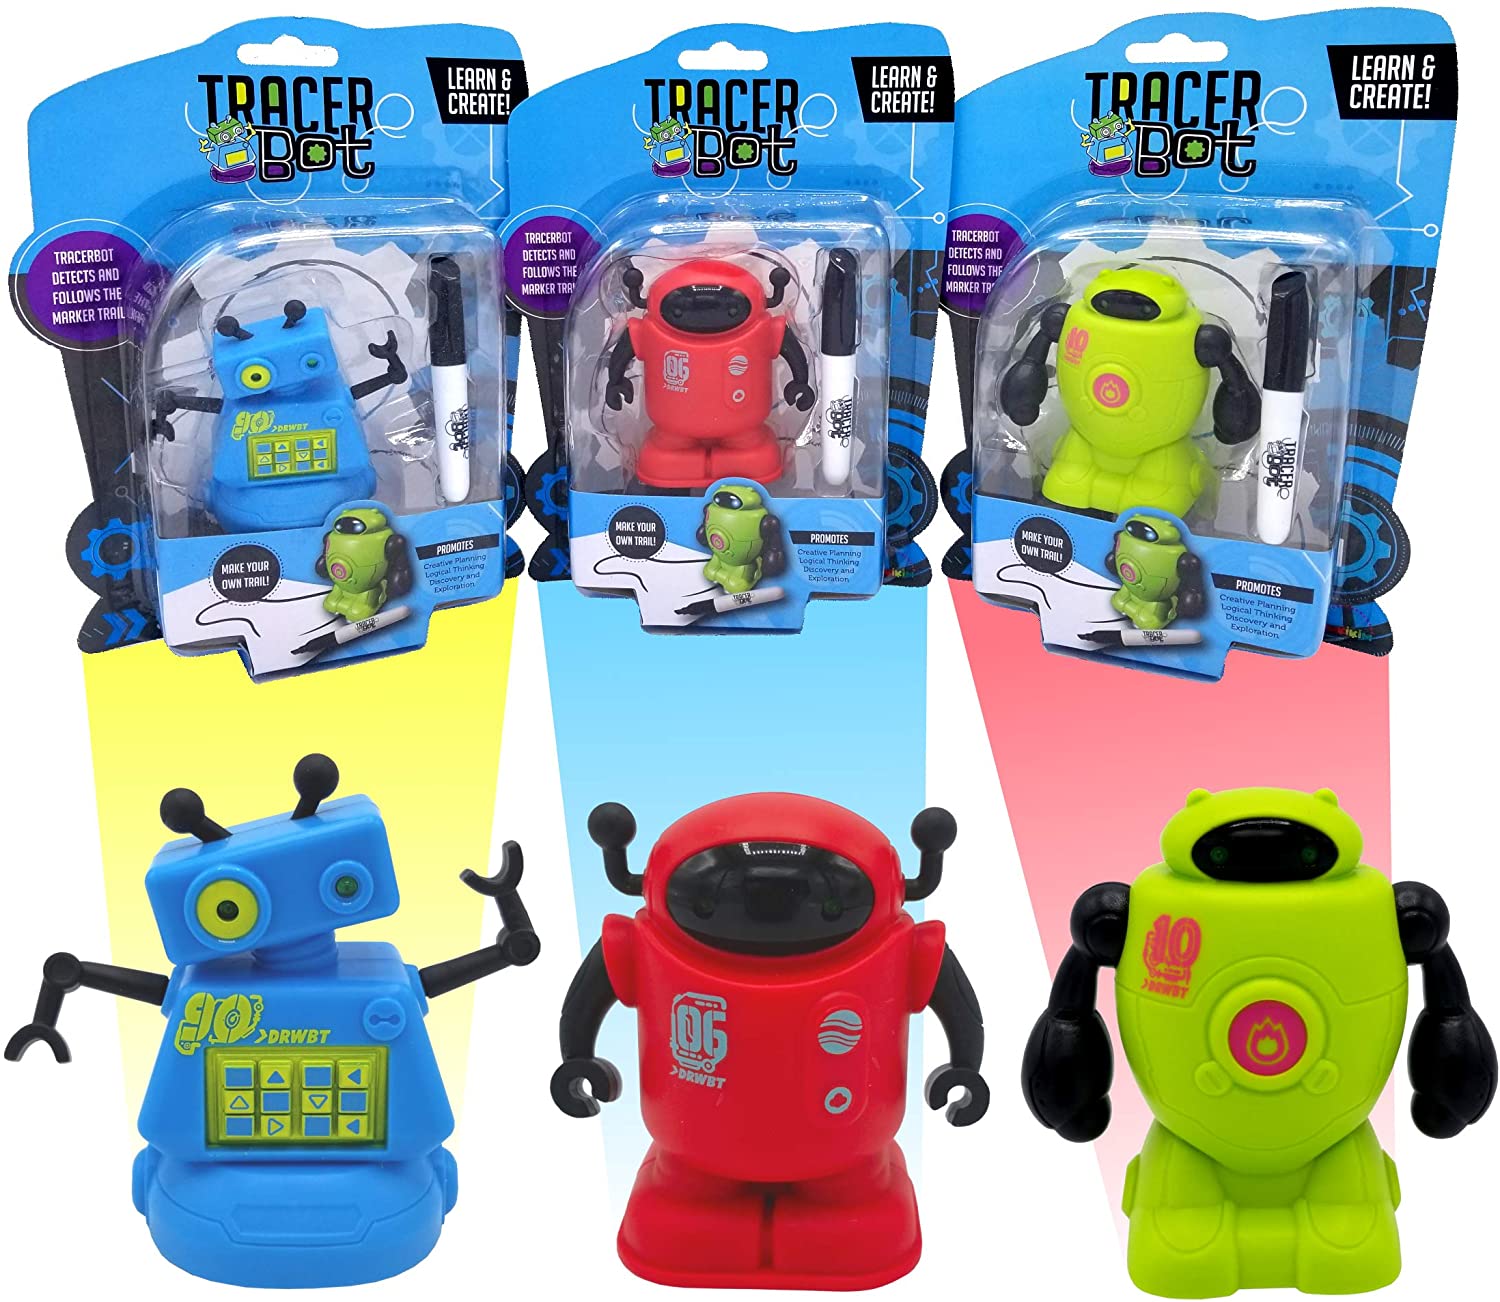 Tracer Bots: Learn & Create! - Ages 5+